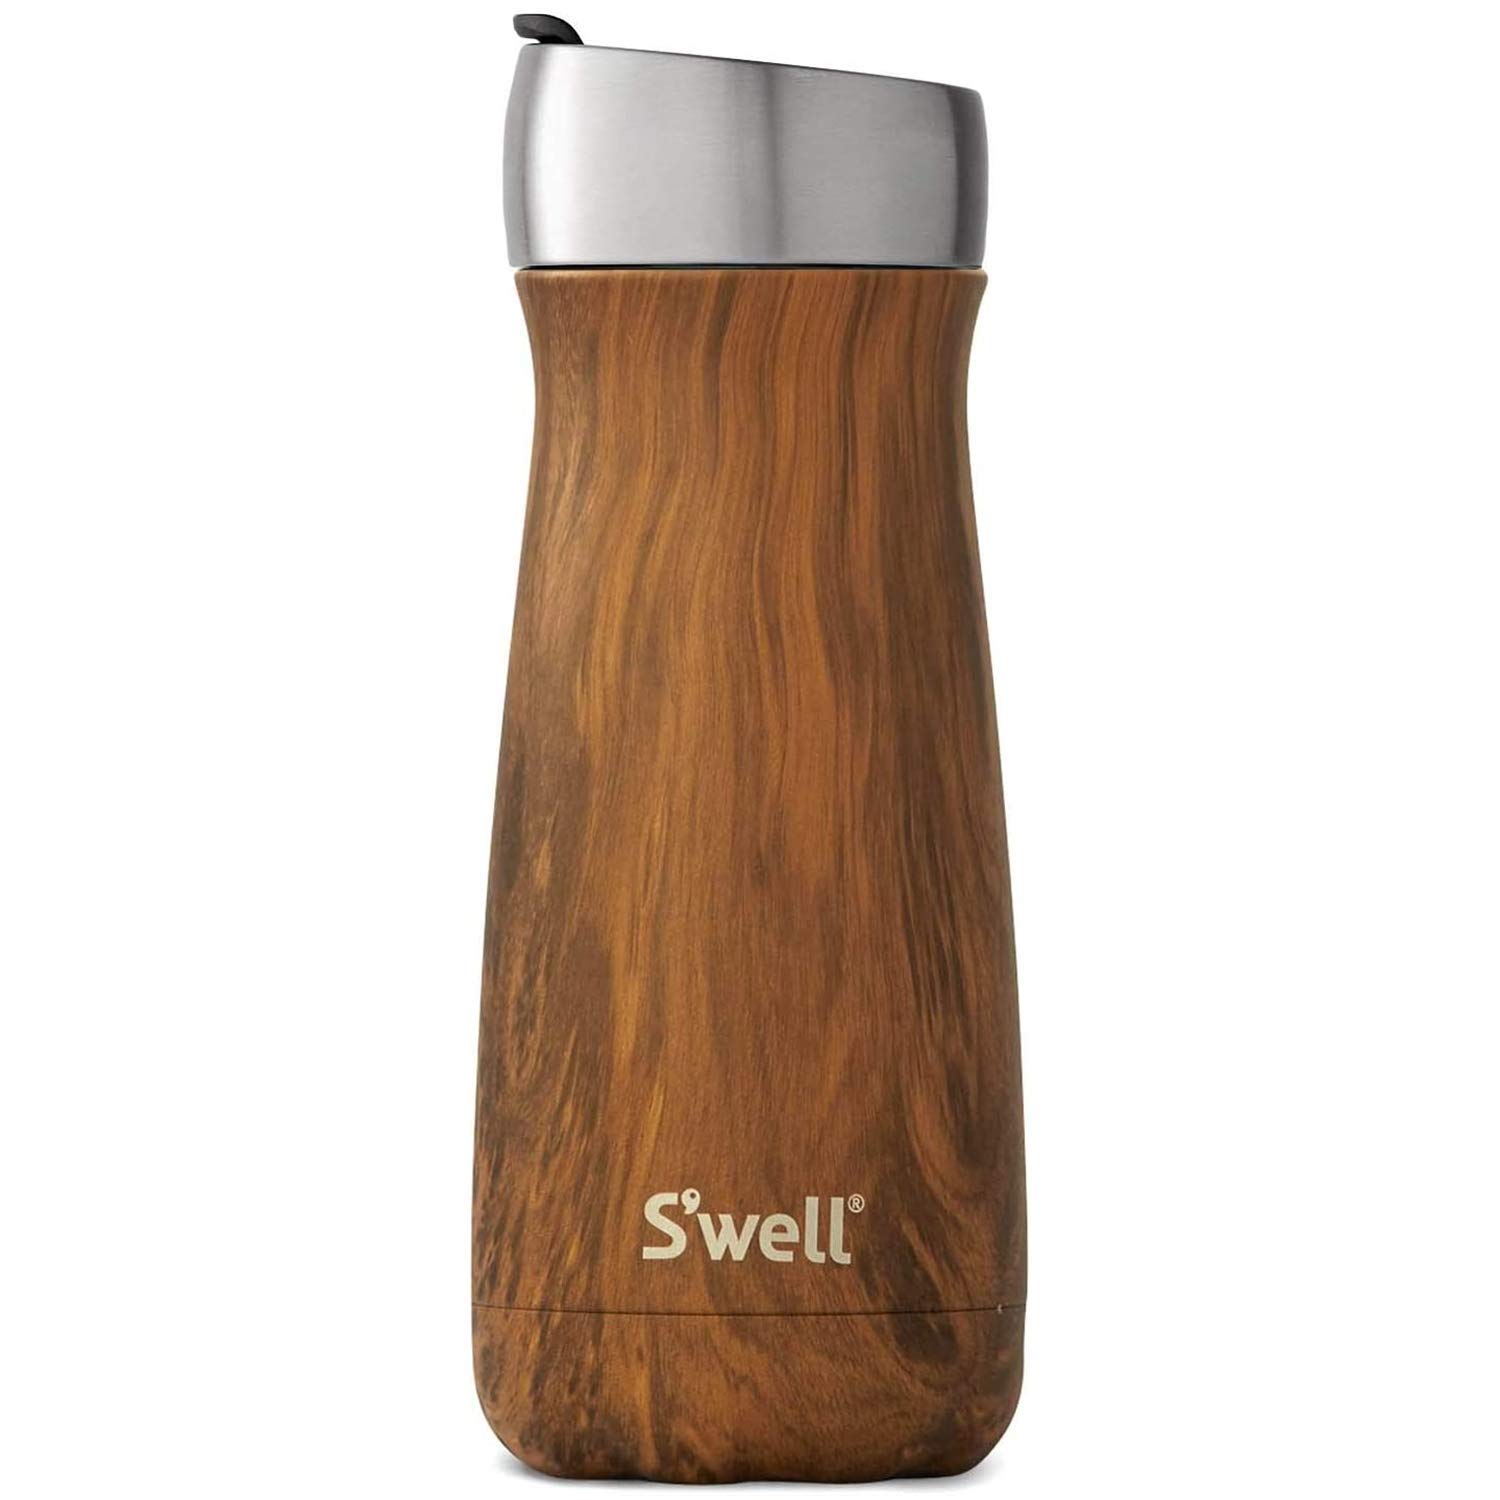 Swell S'well Stainless Steel Commuter Triple-Layered Vacuum-Insulated Containers Keeps Drinks Cold for 24 Hours and Hot for 6 -